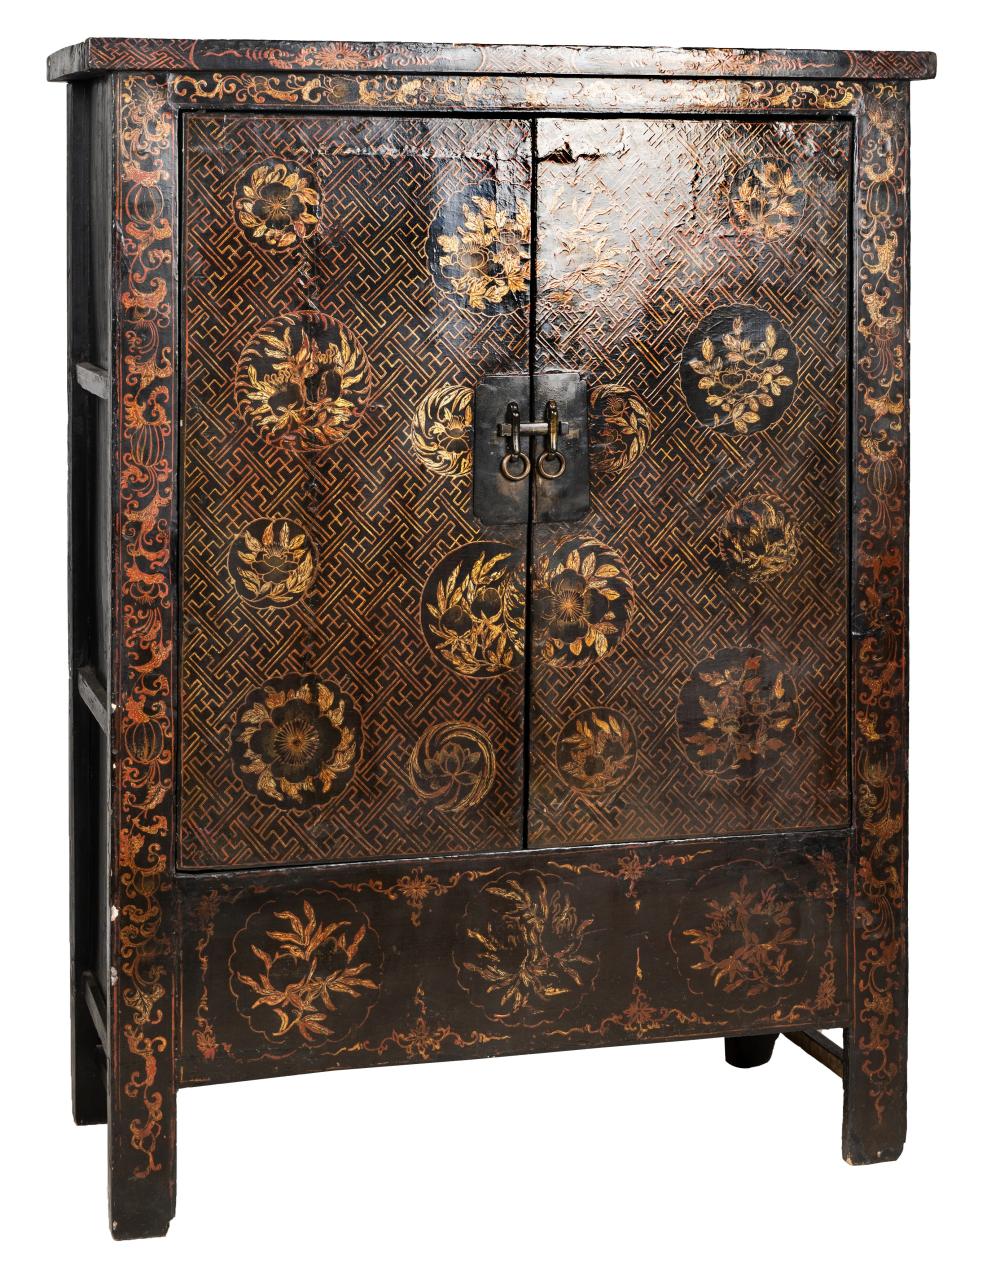 CHINESE ANTIQUE PAINTED CABINET\having